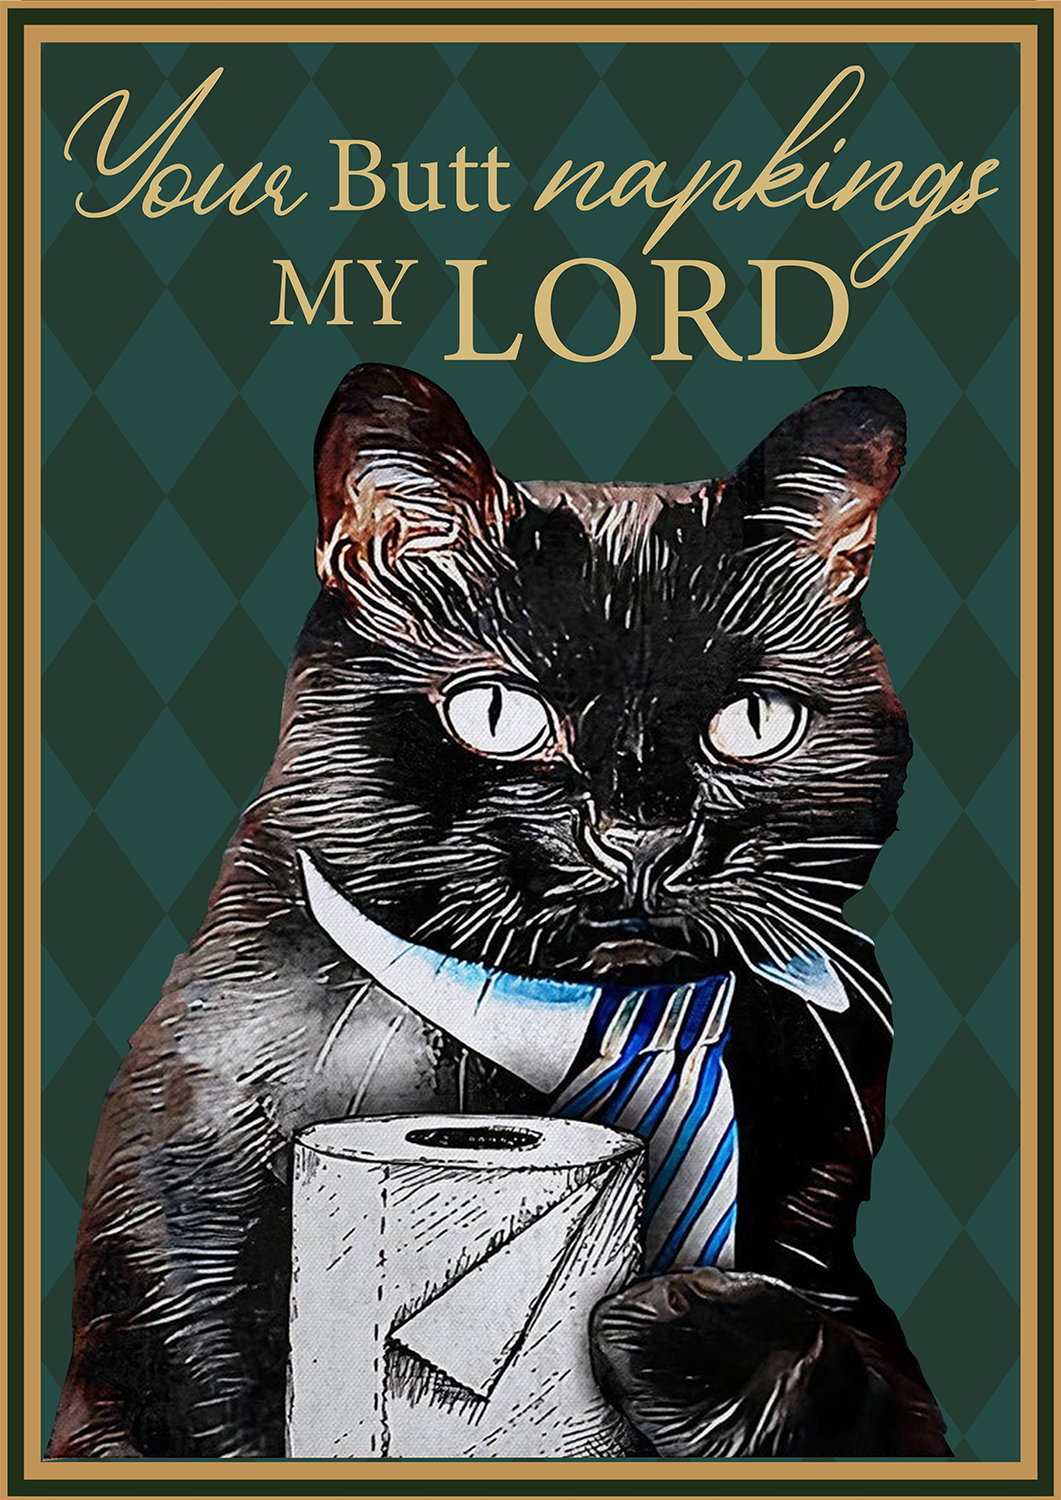 Skitongifts Poster No Frame, Wall Art, Home Decor Cat Your Butt Napkins My Lord 1 TT307